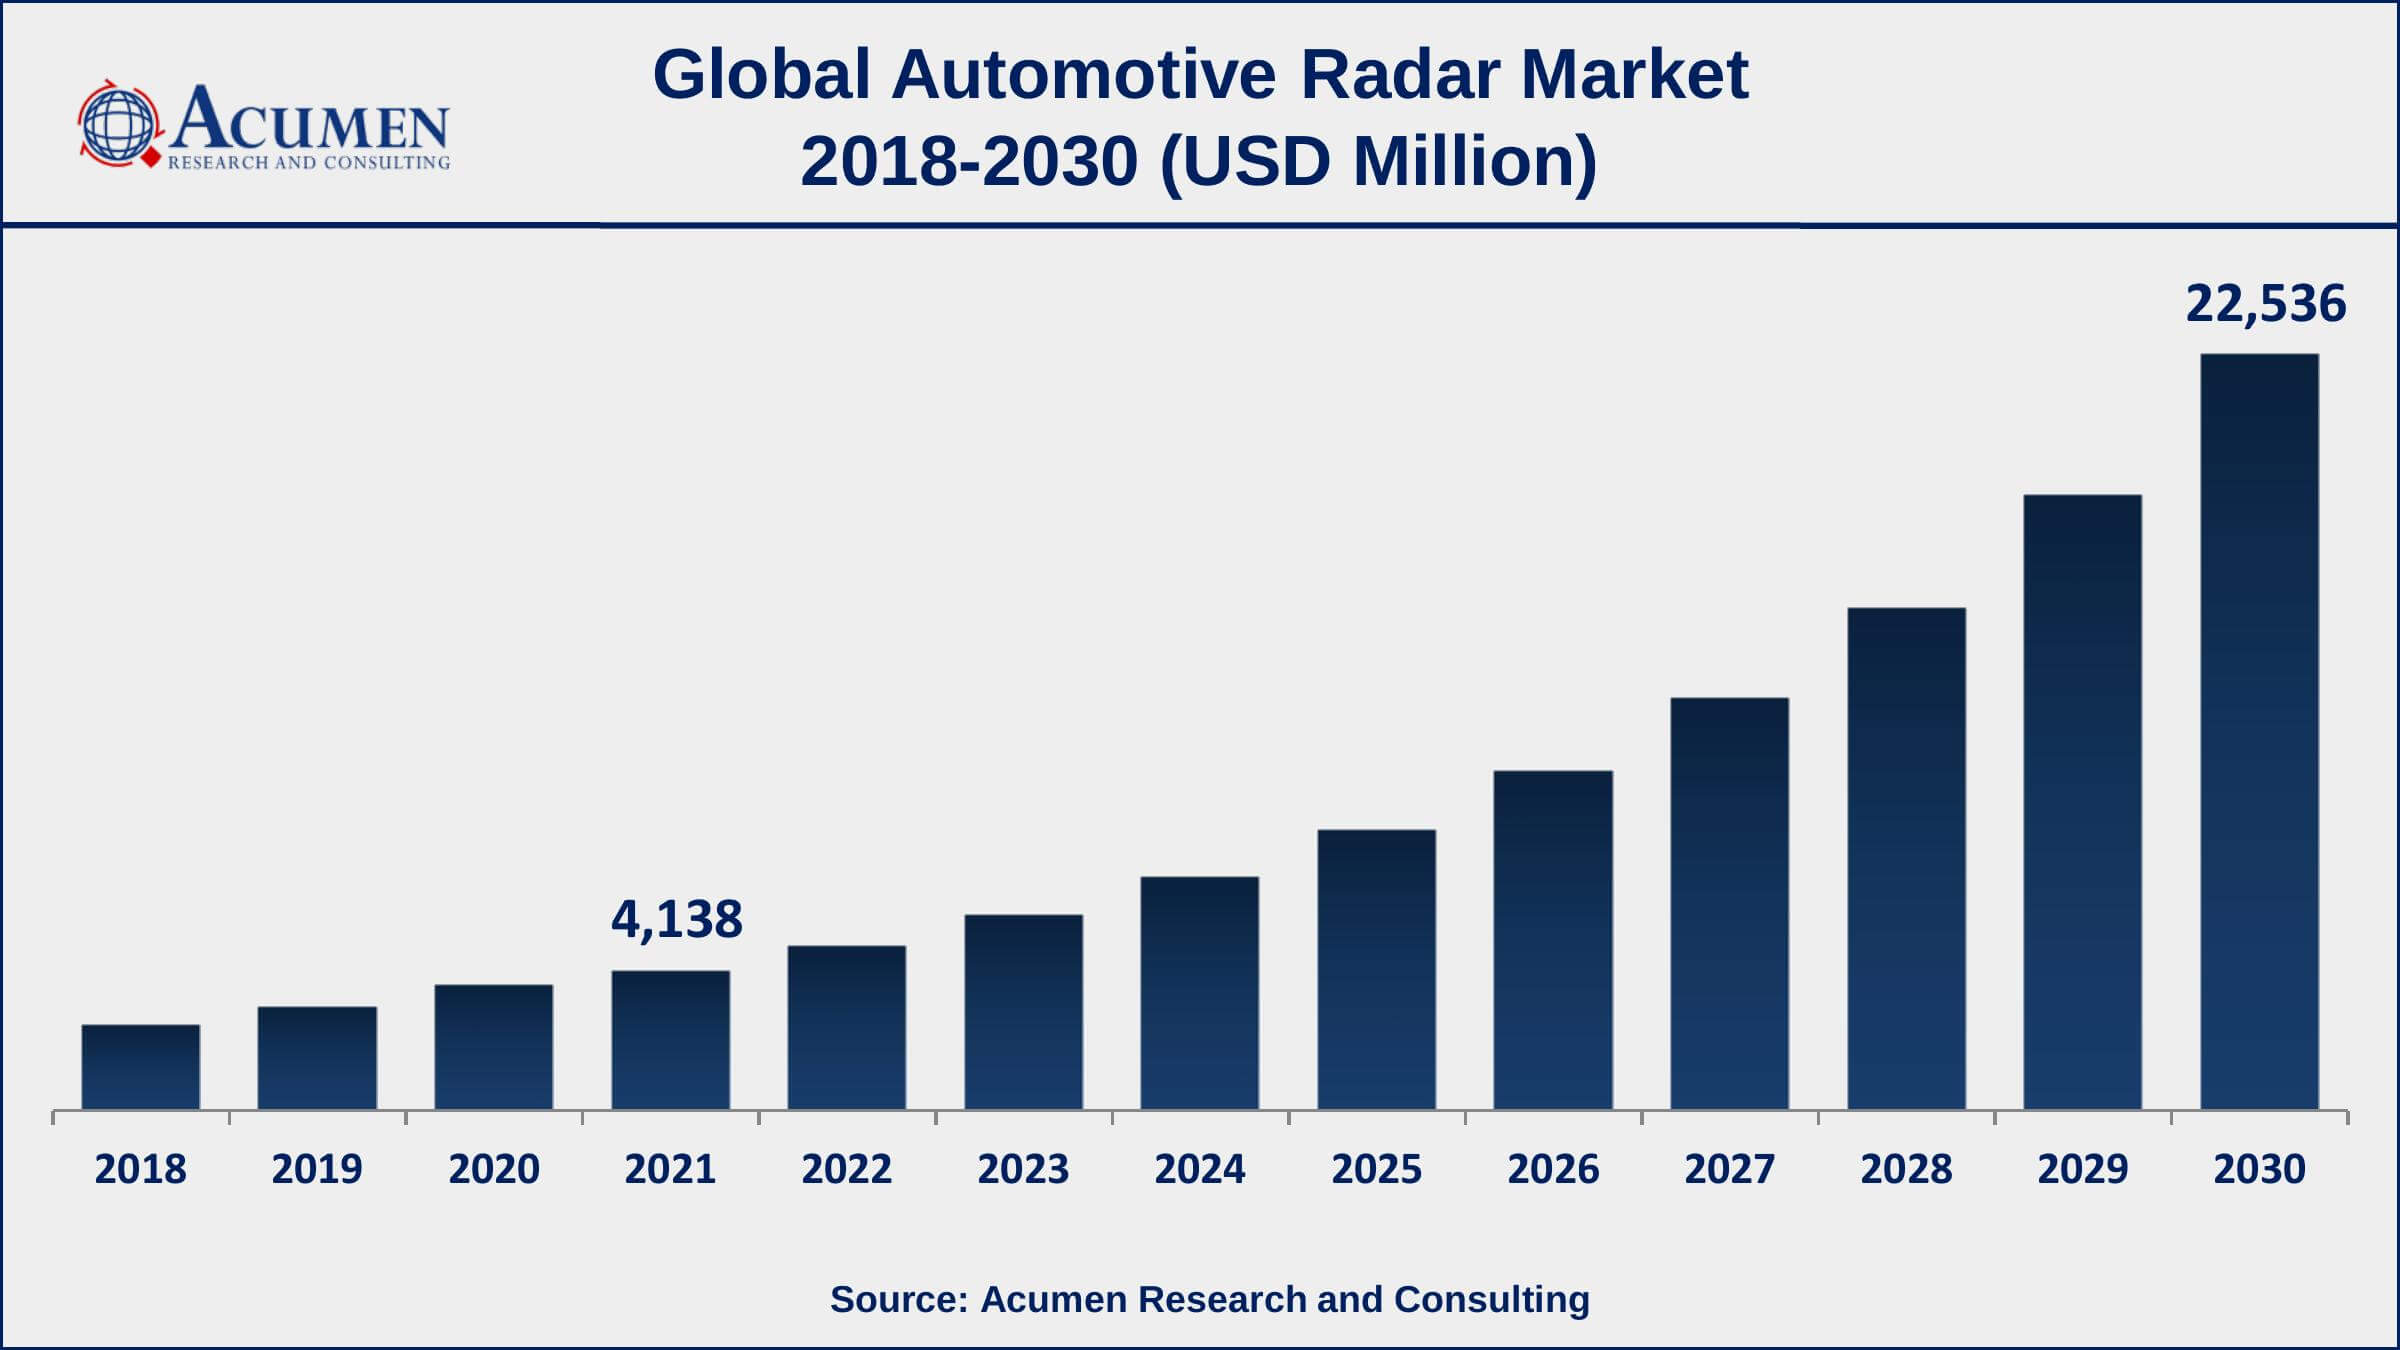 Asia-Pacific automotive radar market growth will observe strongest CAGR from 2022 to 2030